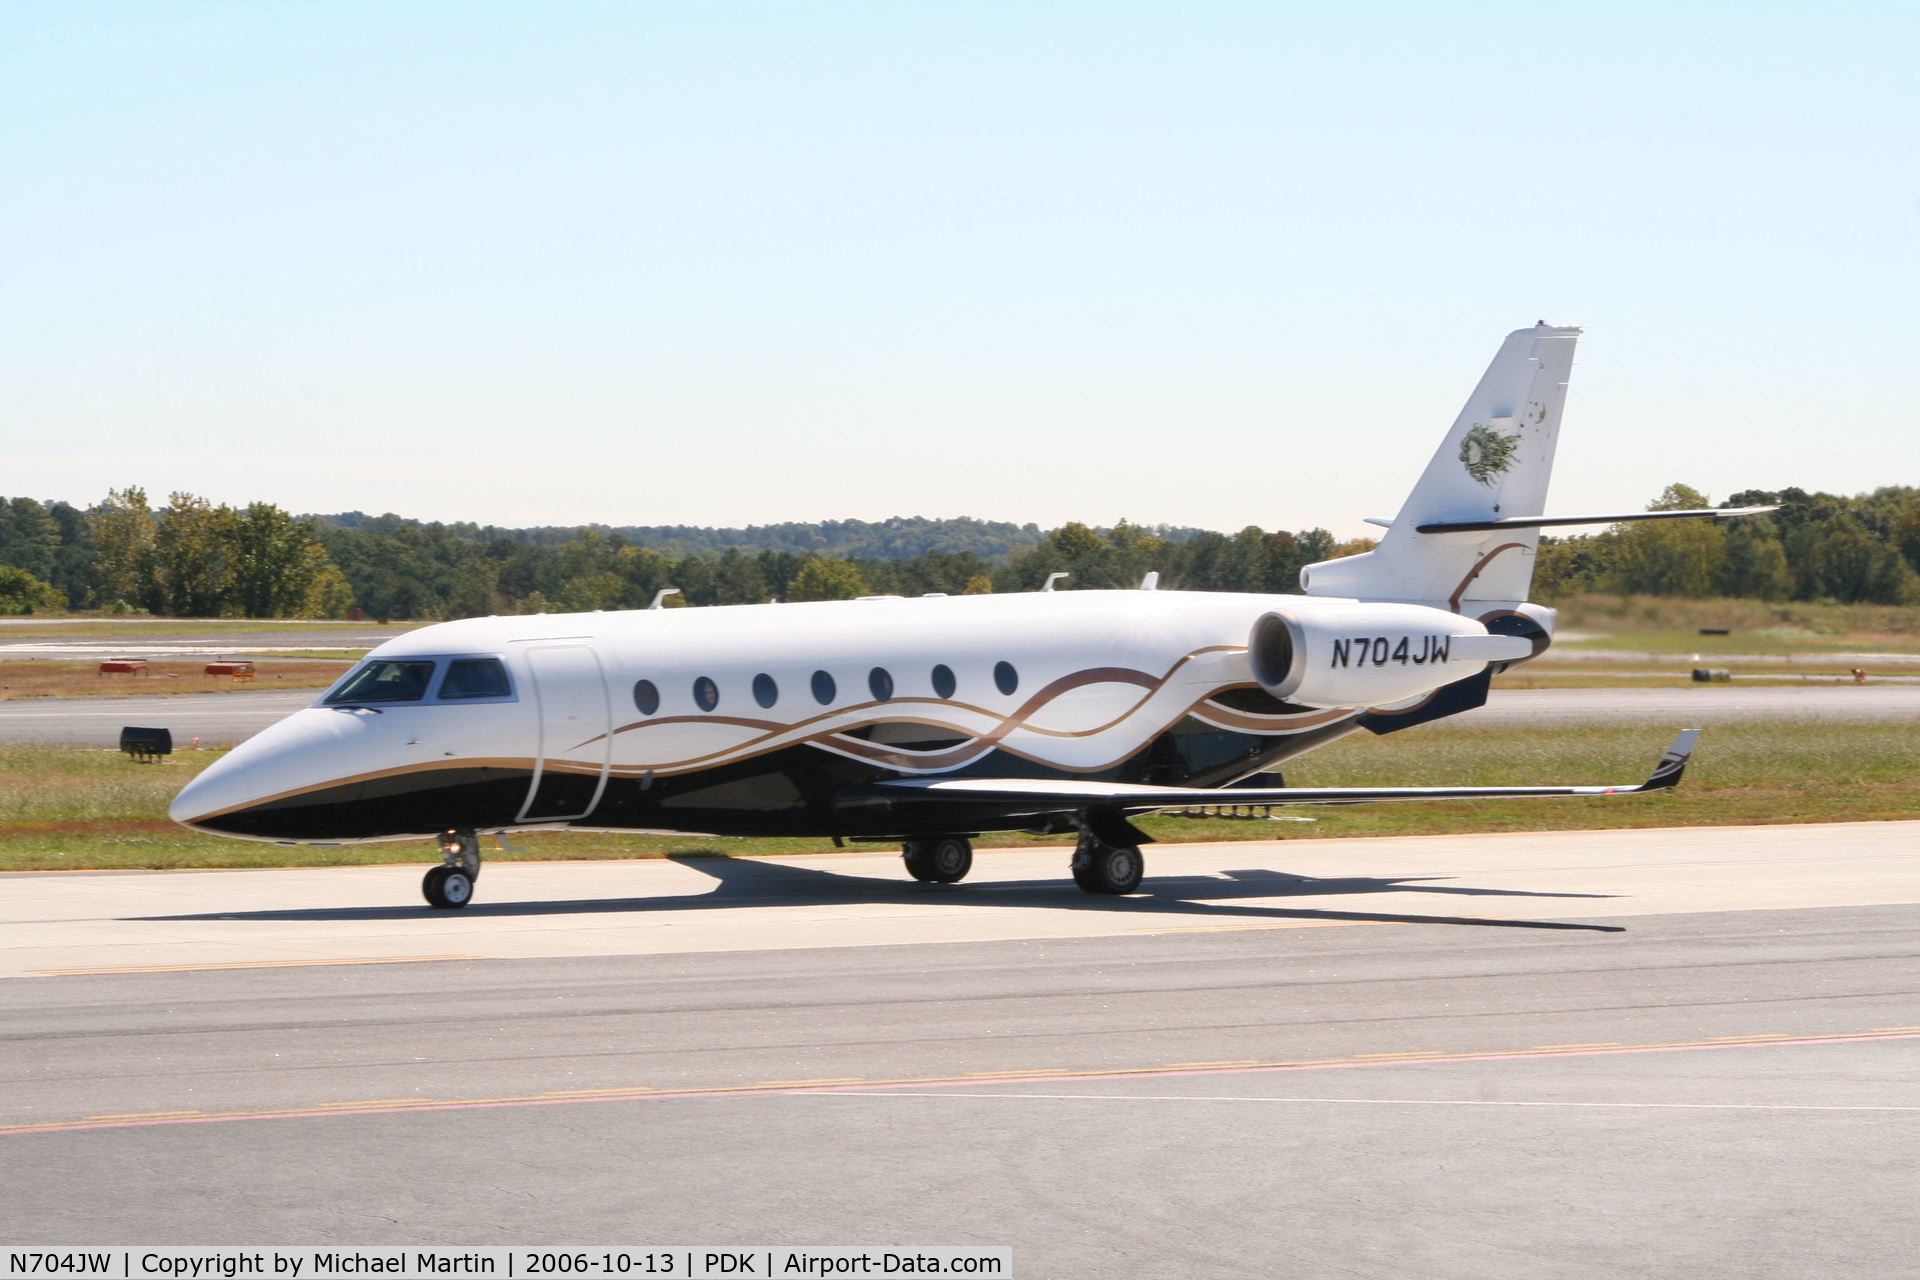 N704JW, 2003 Israel Aircraft Industries Gulfstream 200 C/N 088, Taxing to Epps Air Service